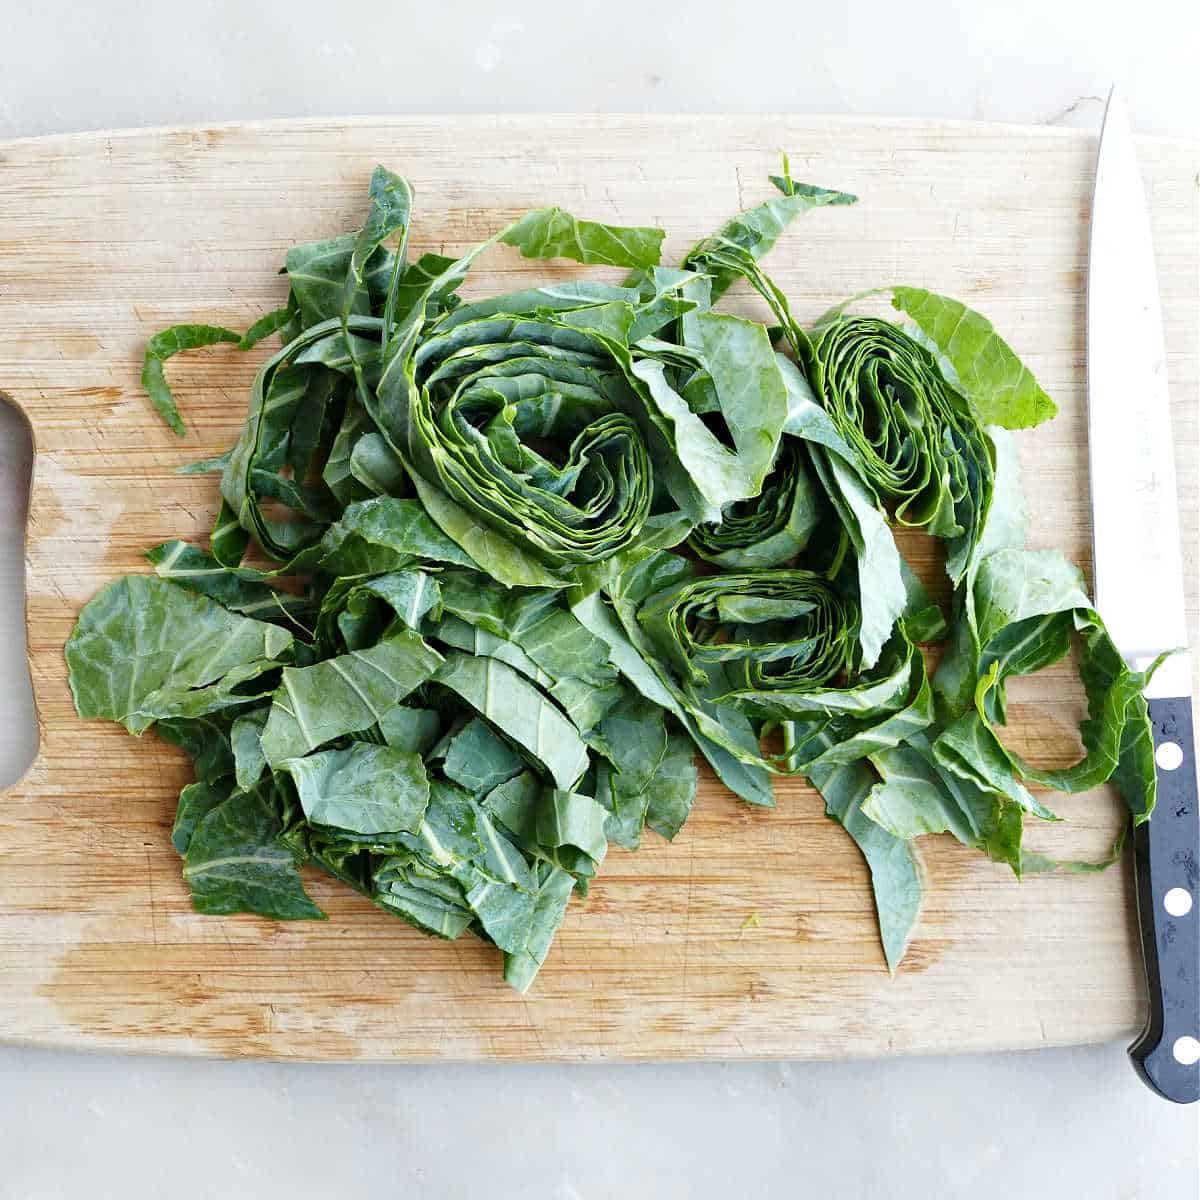 collard greens being cut into strips on a cutting board with a knife